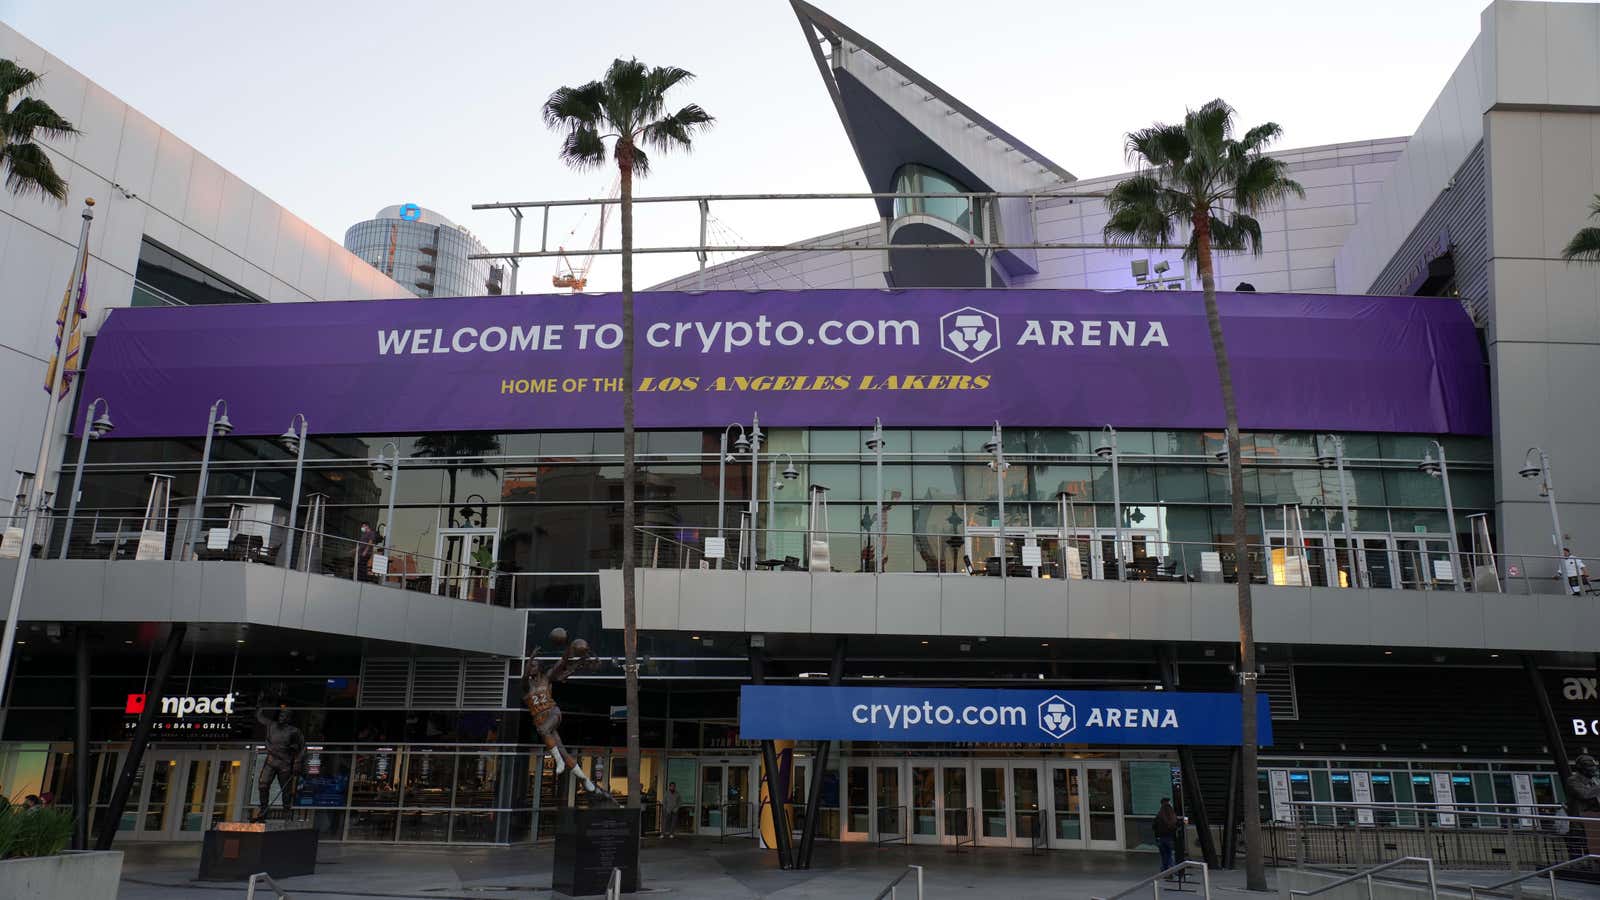 The Crypto.com arena in Los Angeles.